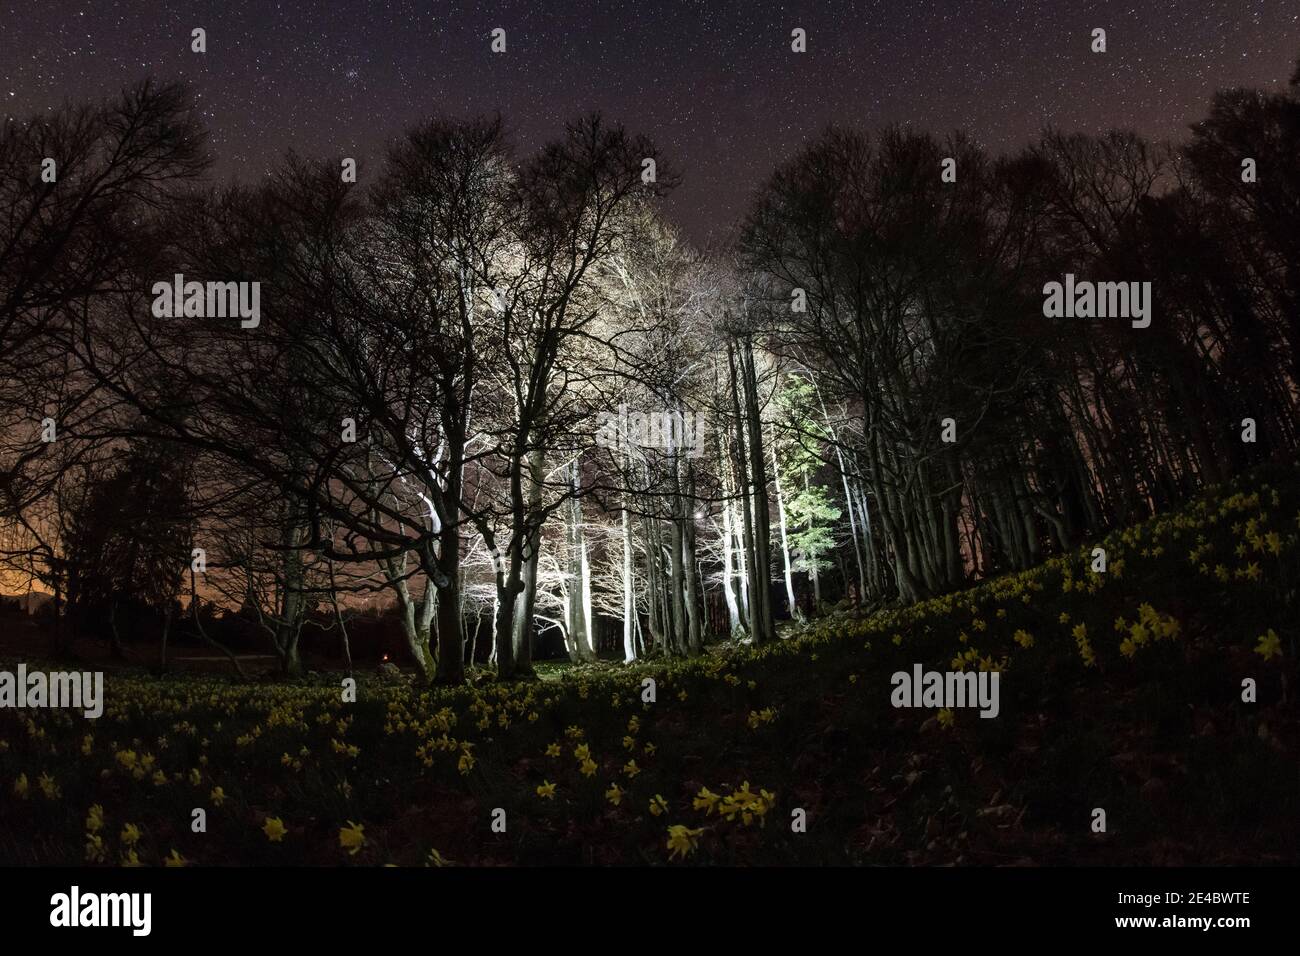 Grove of trees at night with daffodils Stock Photo